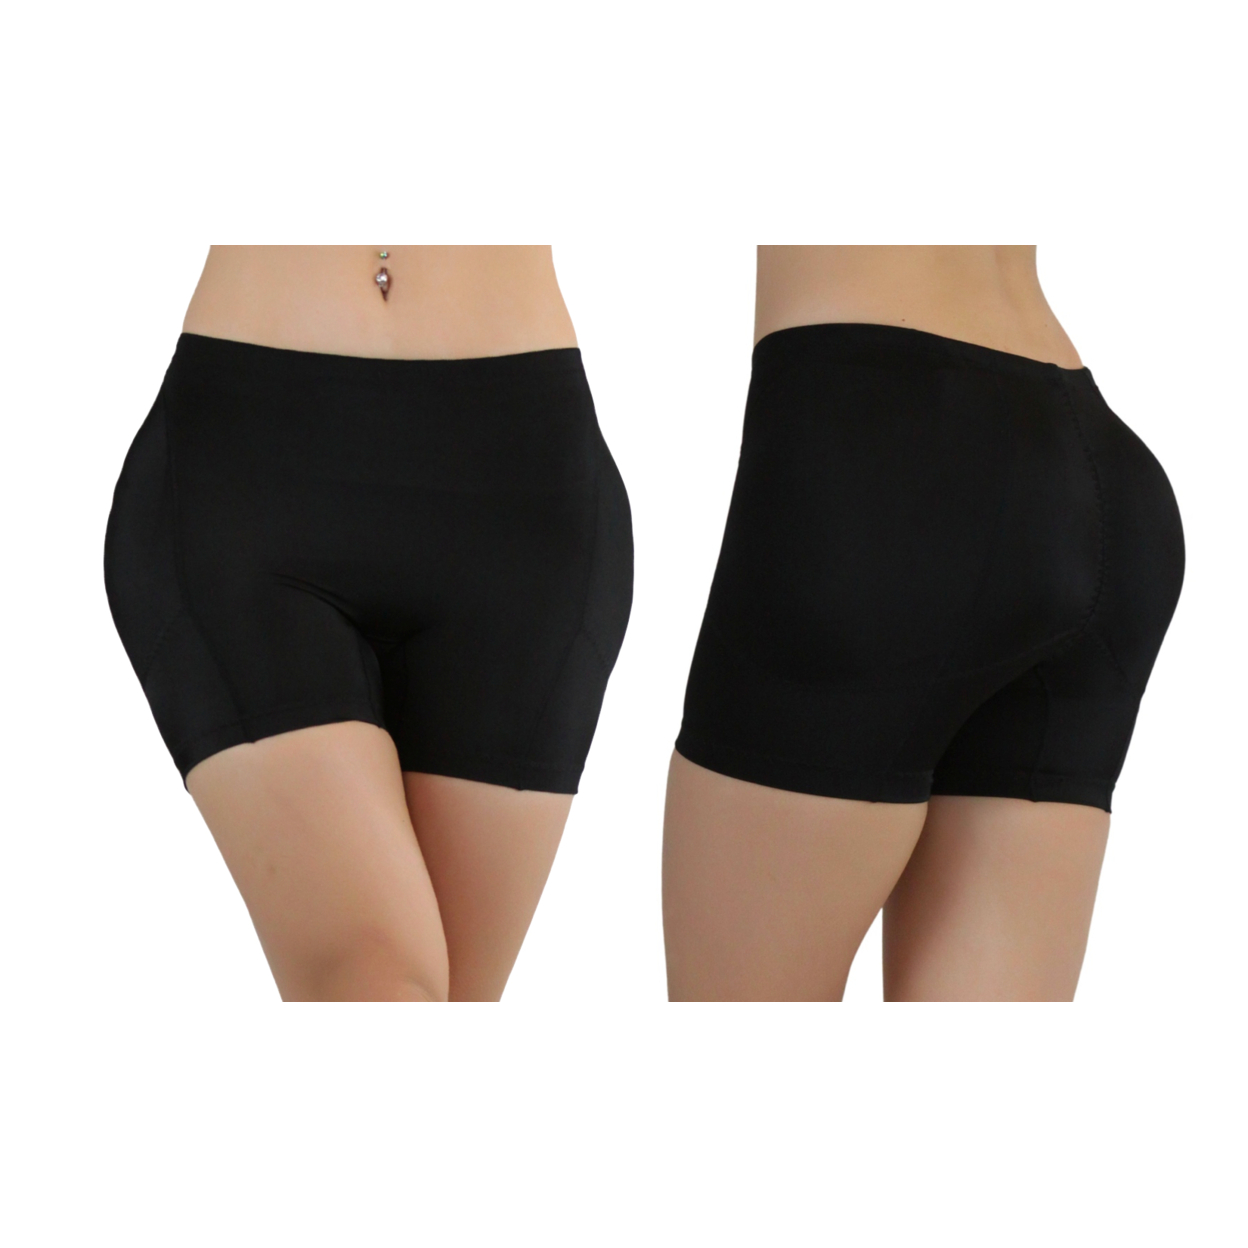 1 Or 2 Pack Of Women Butt And Hip Padded Shaper - Black, XL